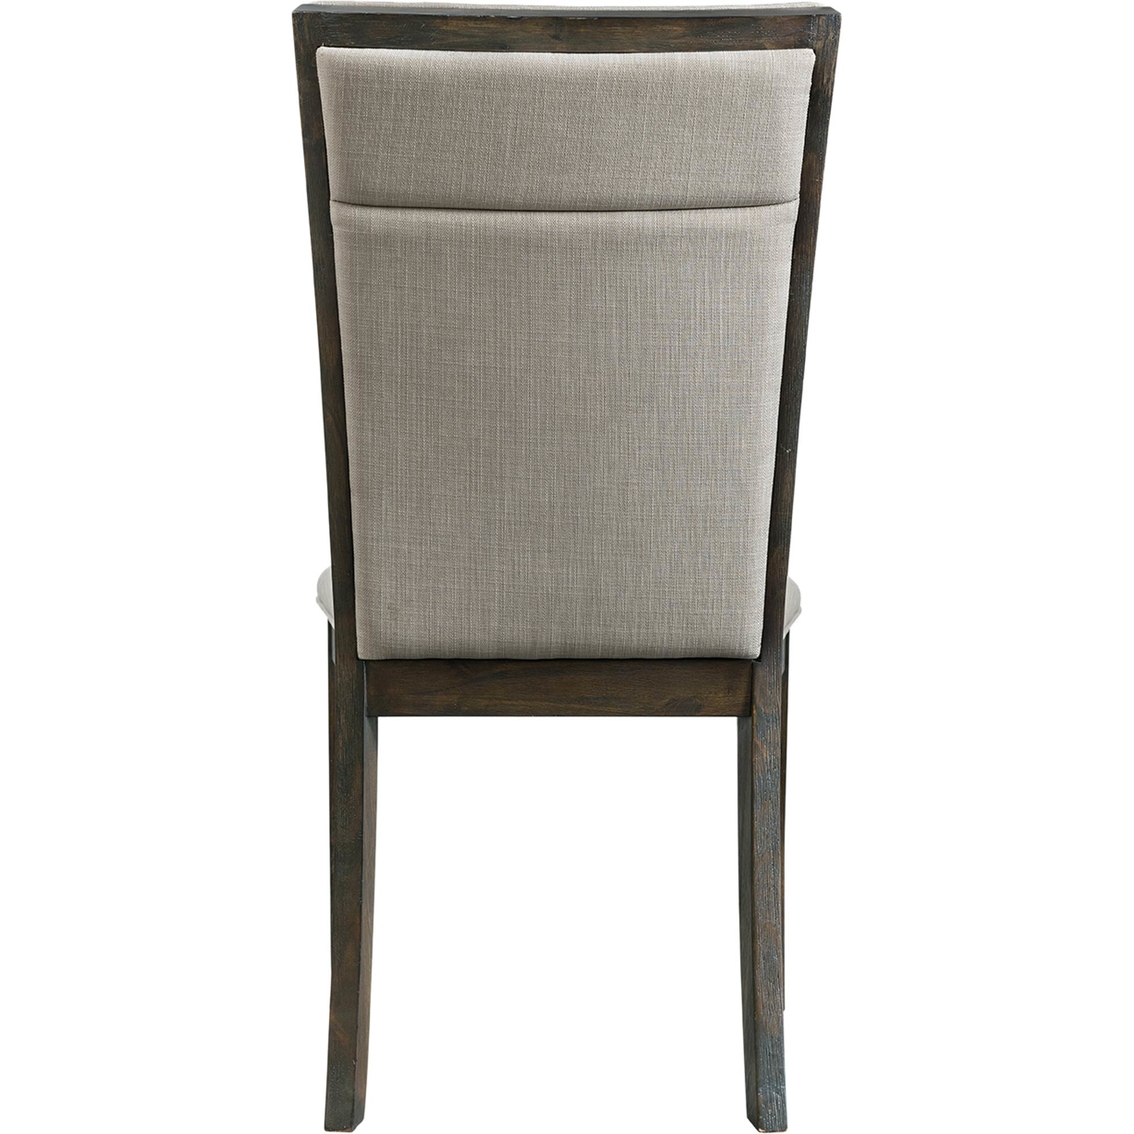 Elements Grady 7 pc. Dining Set with Upholstered Chairs - Image 4 of 8